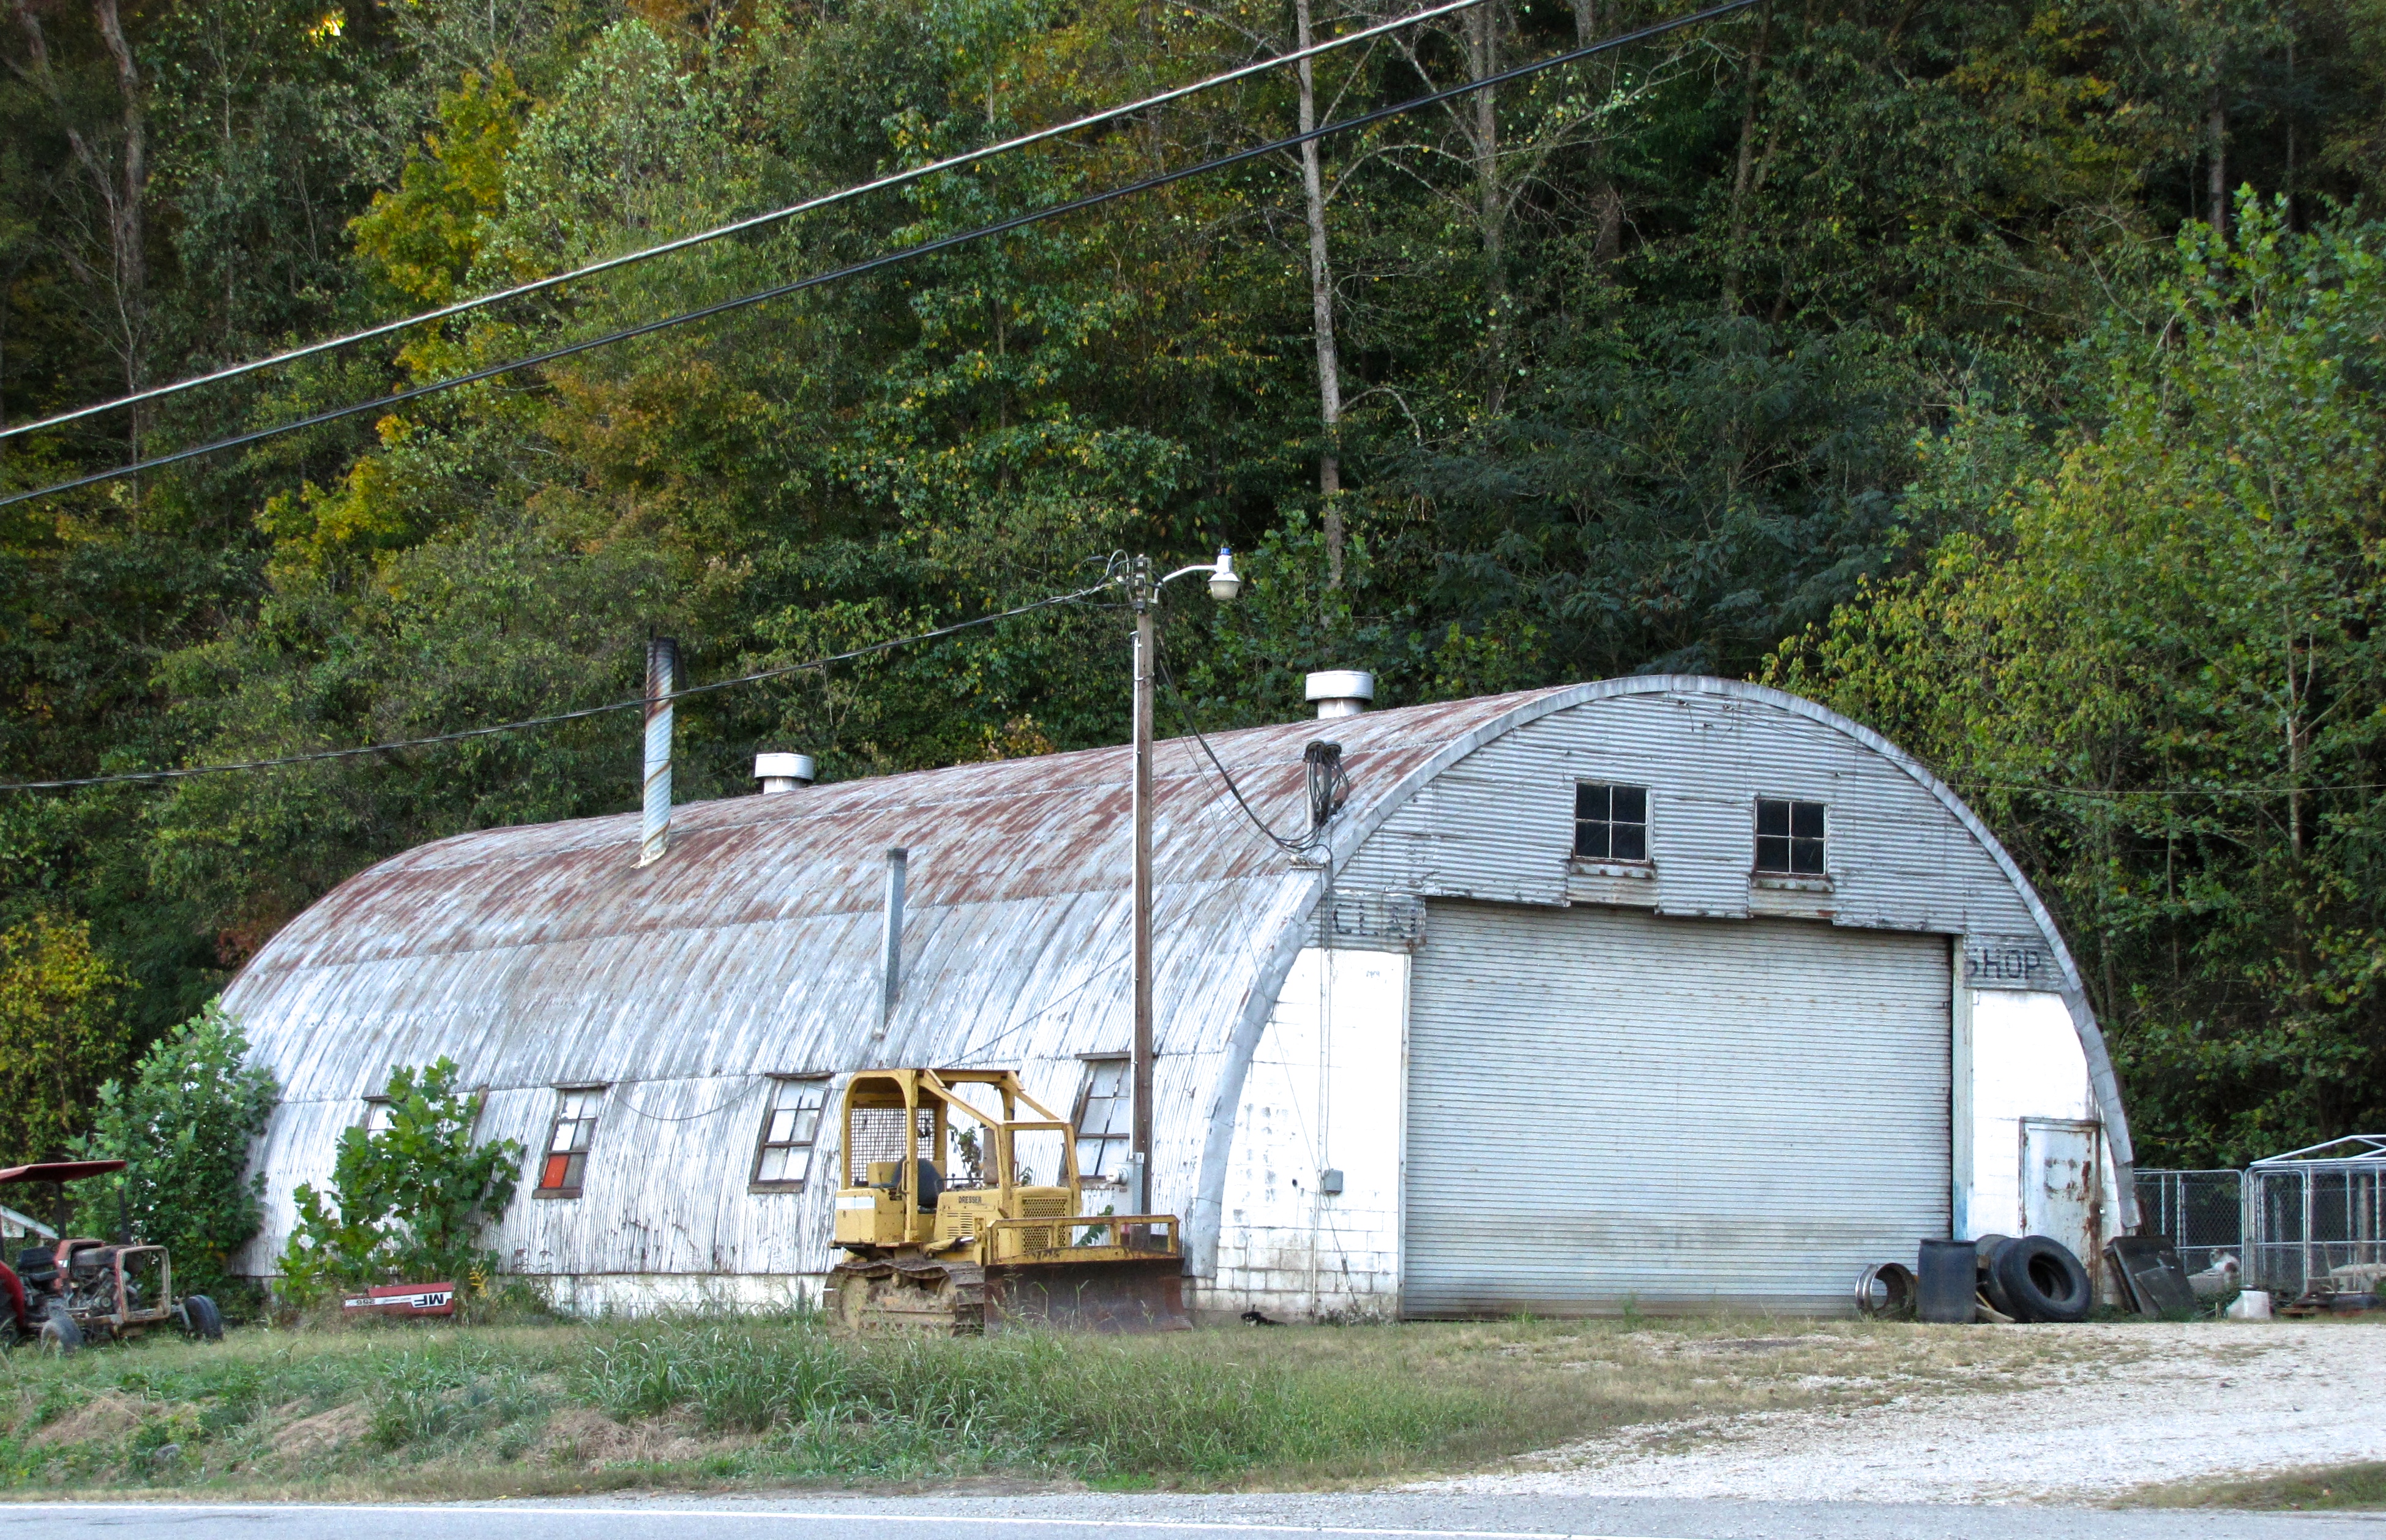 quonset hut in Greenbelt, MD